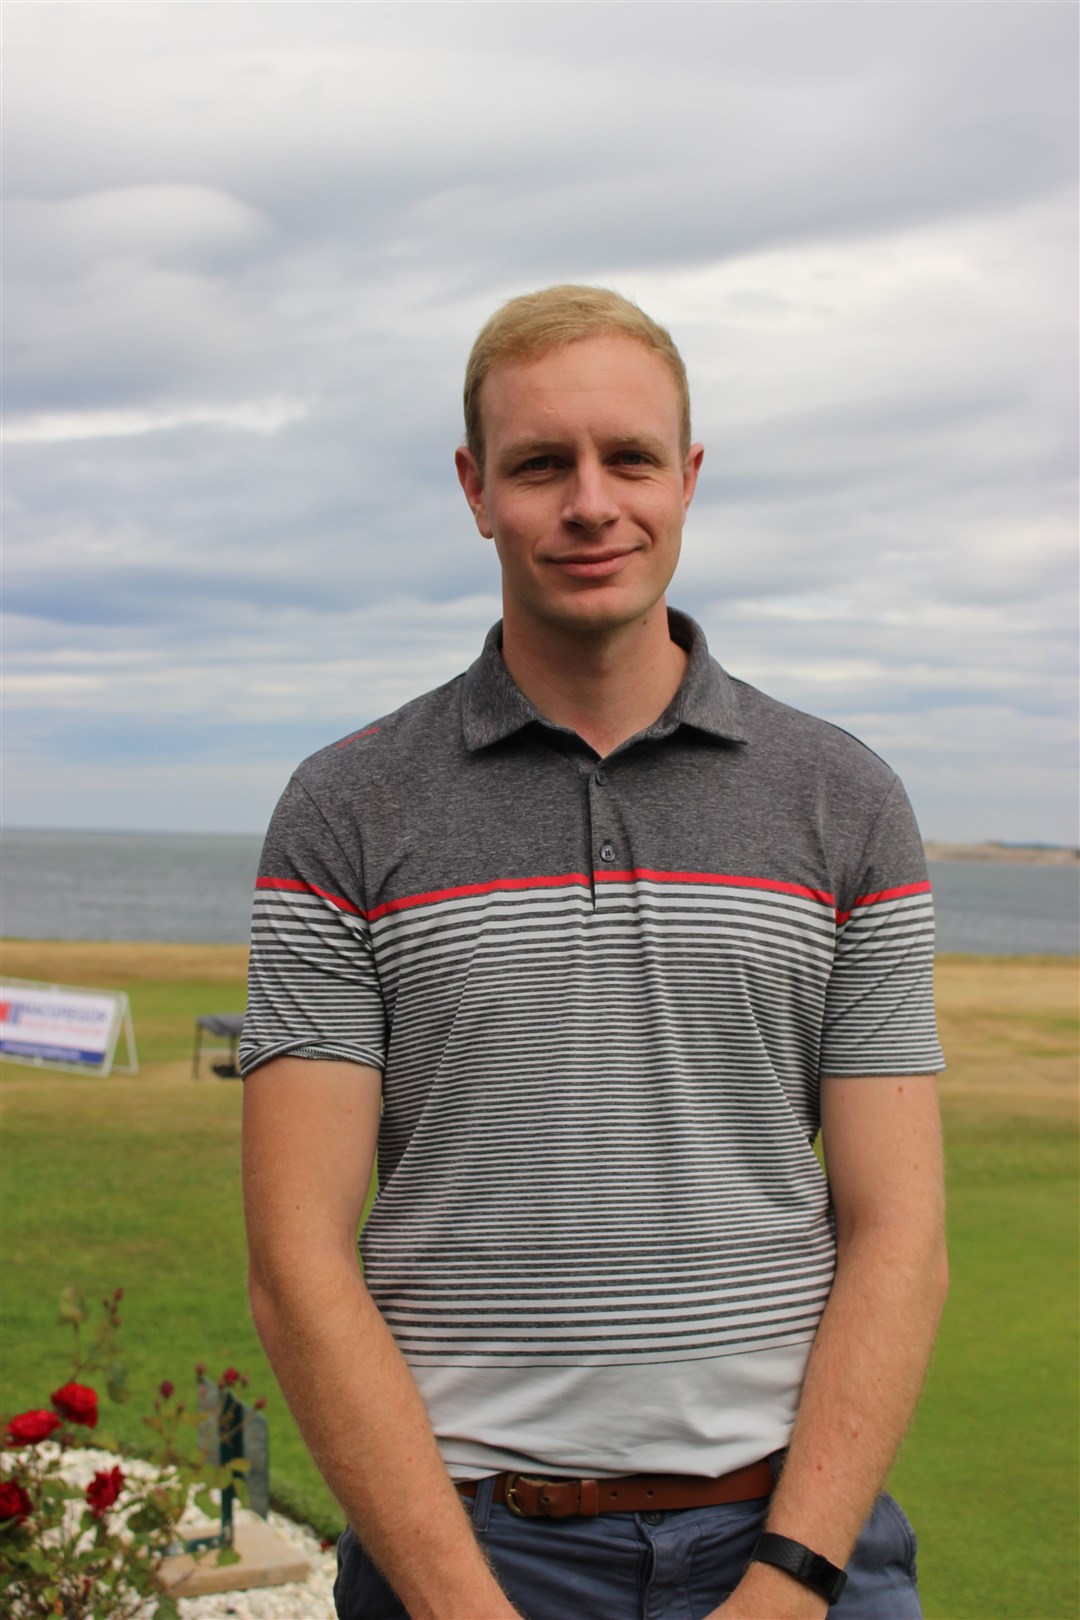 Fortrose and Rosemarkie golfer James Fraser carded his best ever North Scottish Alliance score of 75 at the fixture at Nairn Dunbar.